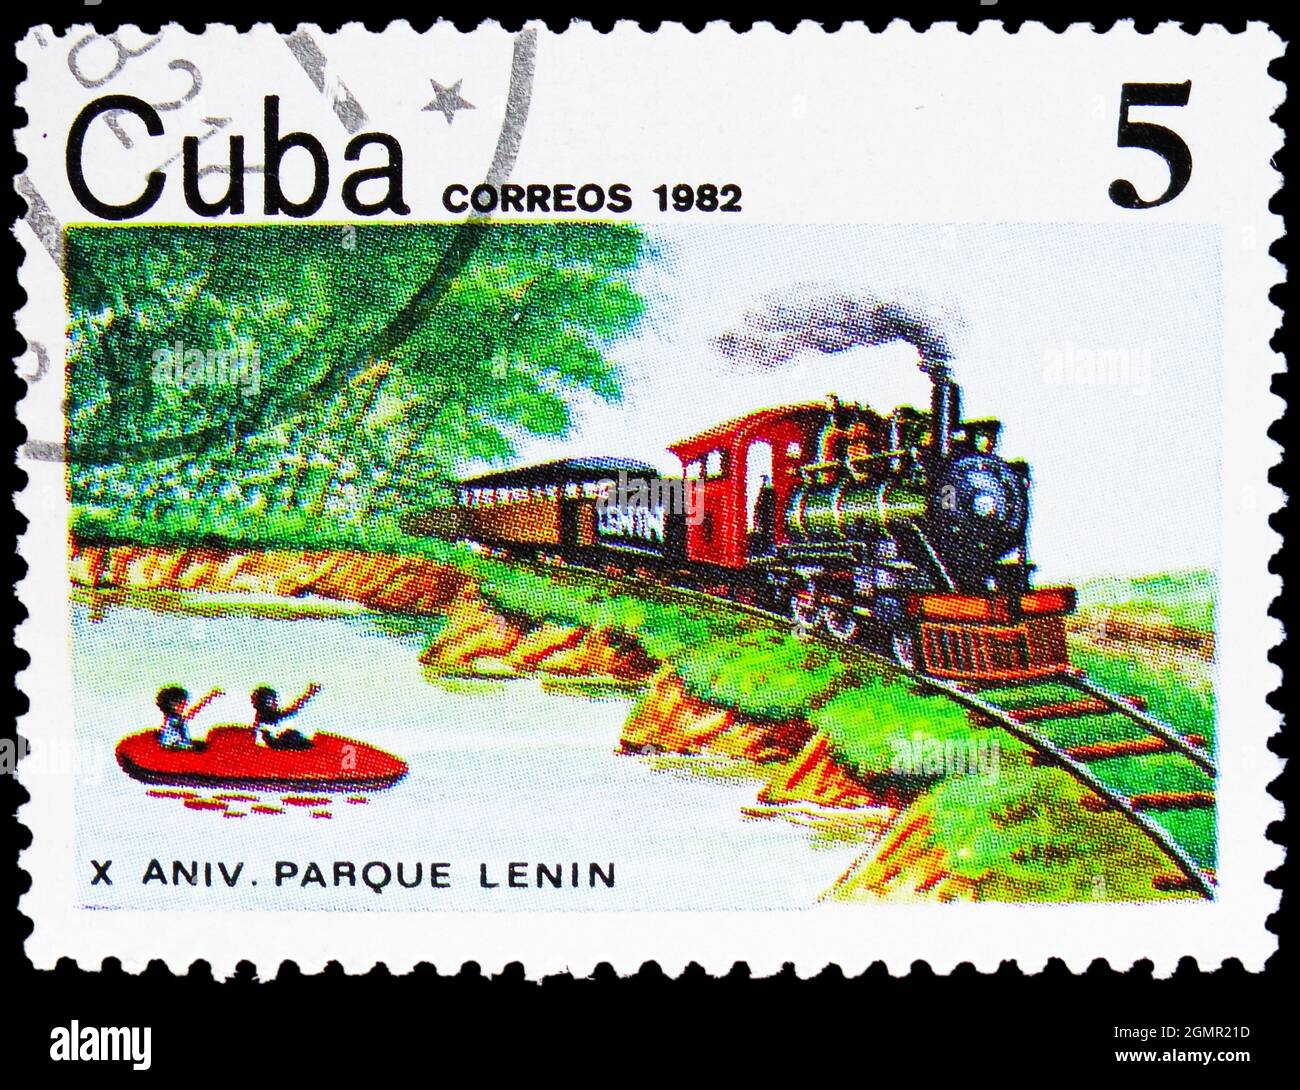 MOSCOW, RUSSIA - JULY 31, 2021: Postage stamp printed in Cuba shows Steam locomotive (1917) and boating lake, 10th Anniversary of Lenin Park in Havana Stock Photo